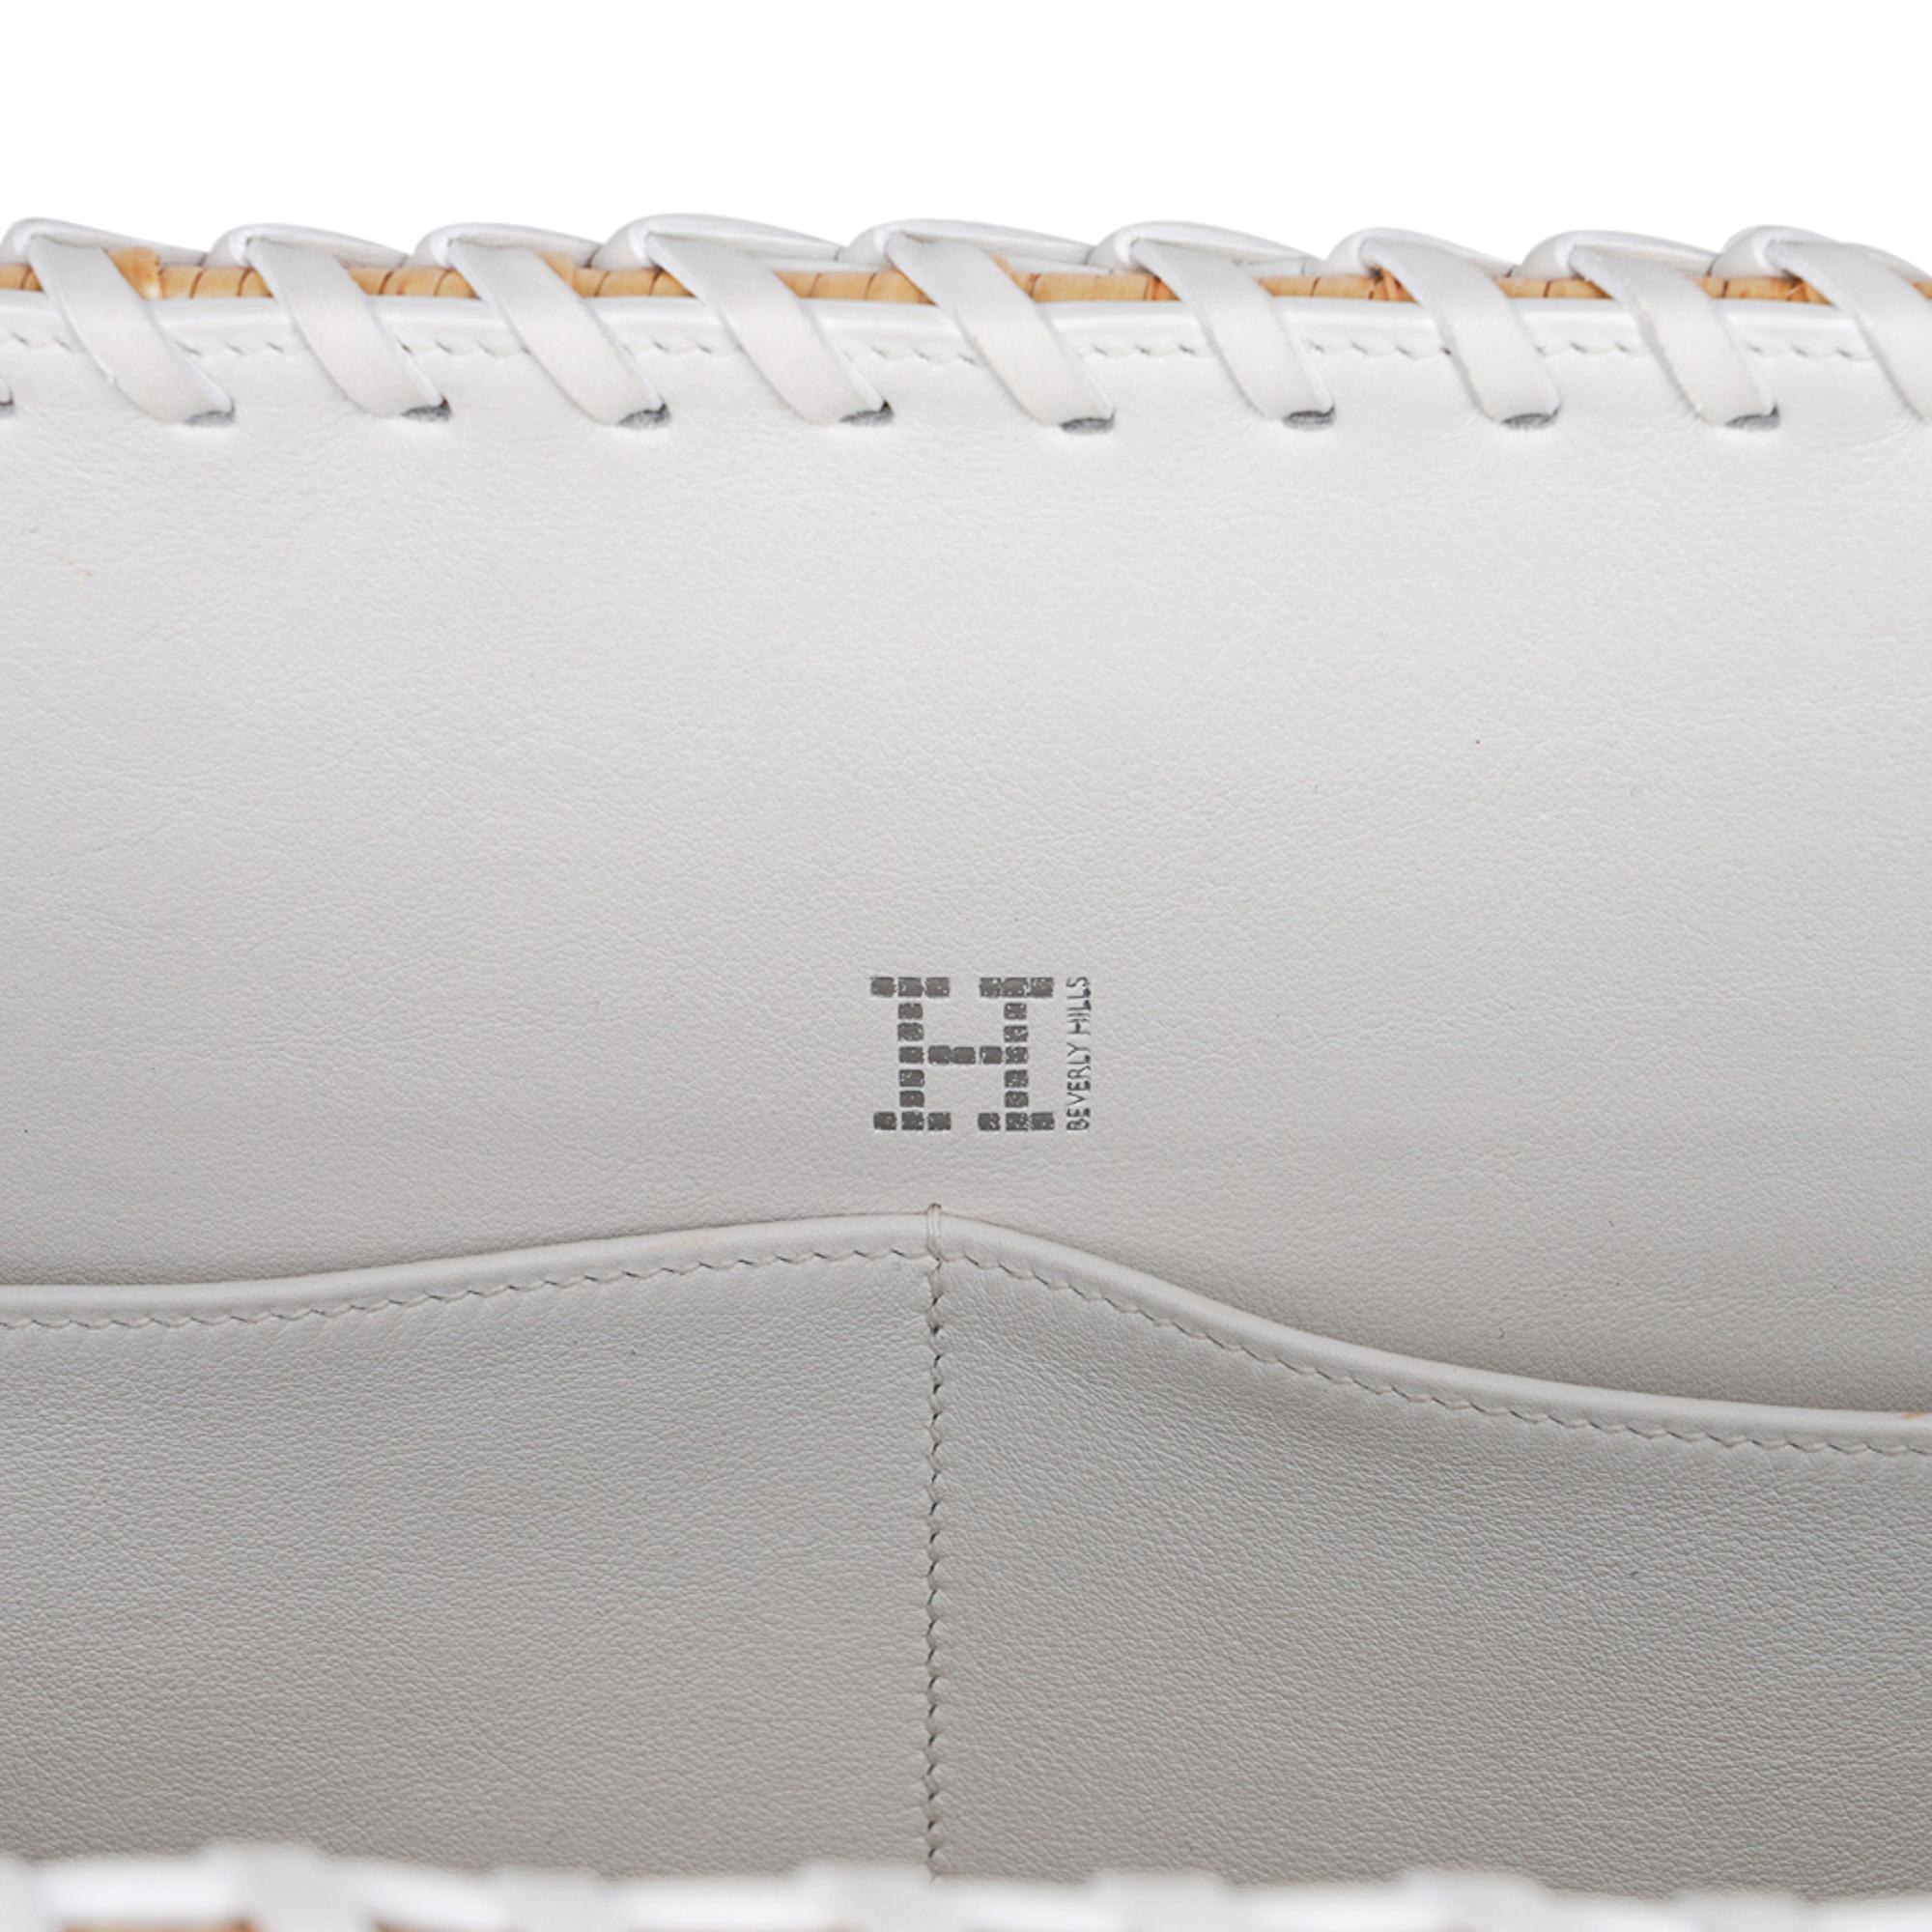 Hermes Kelly Picnic 35 Bag White Swift Leather / Osier (Wicker) Limited Edition 8